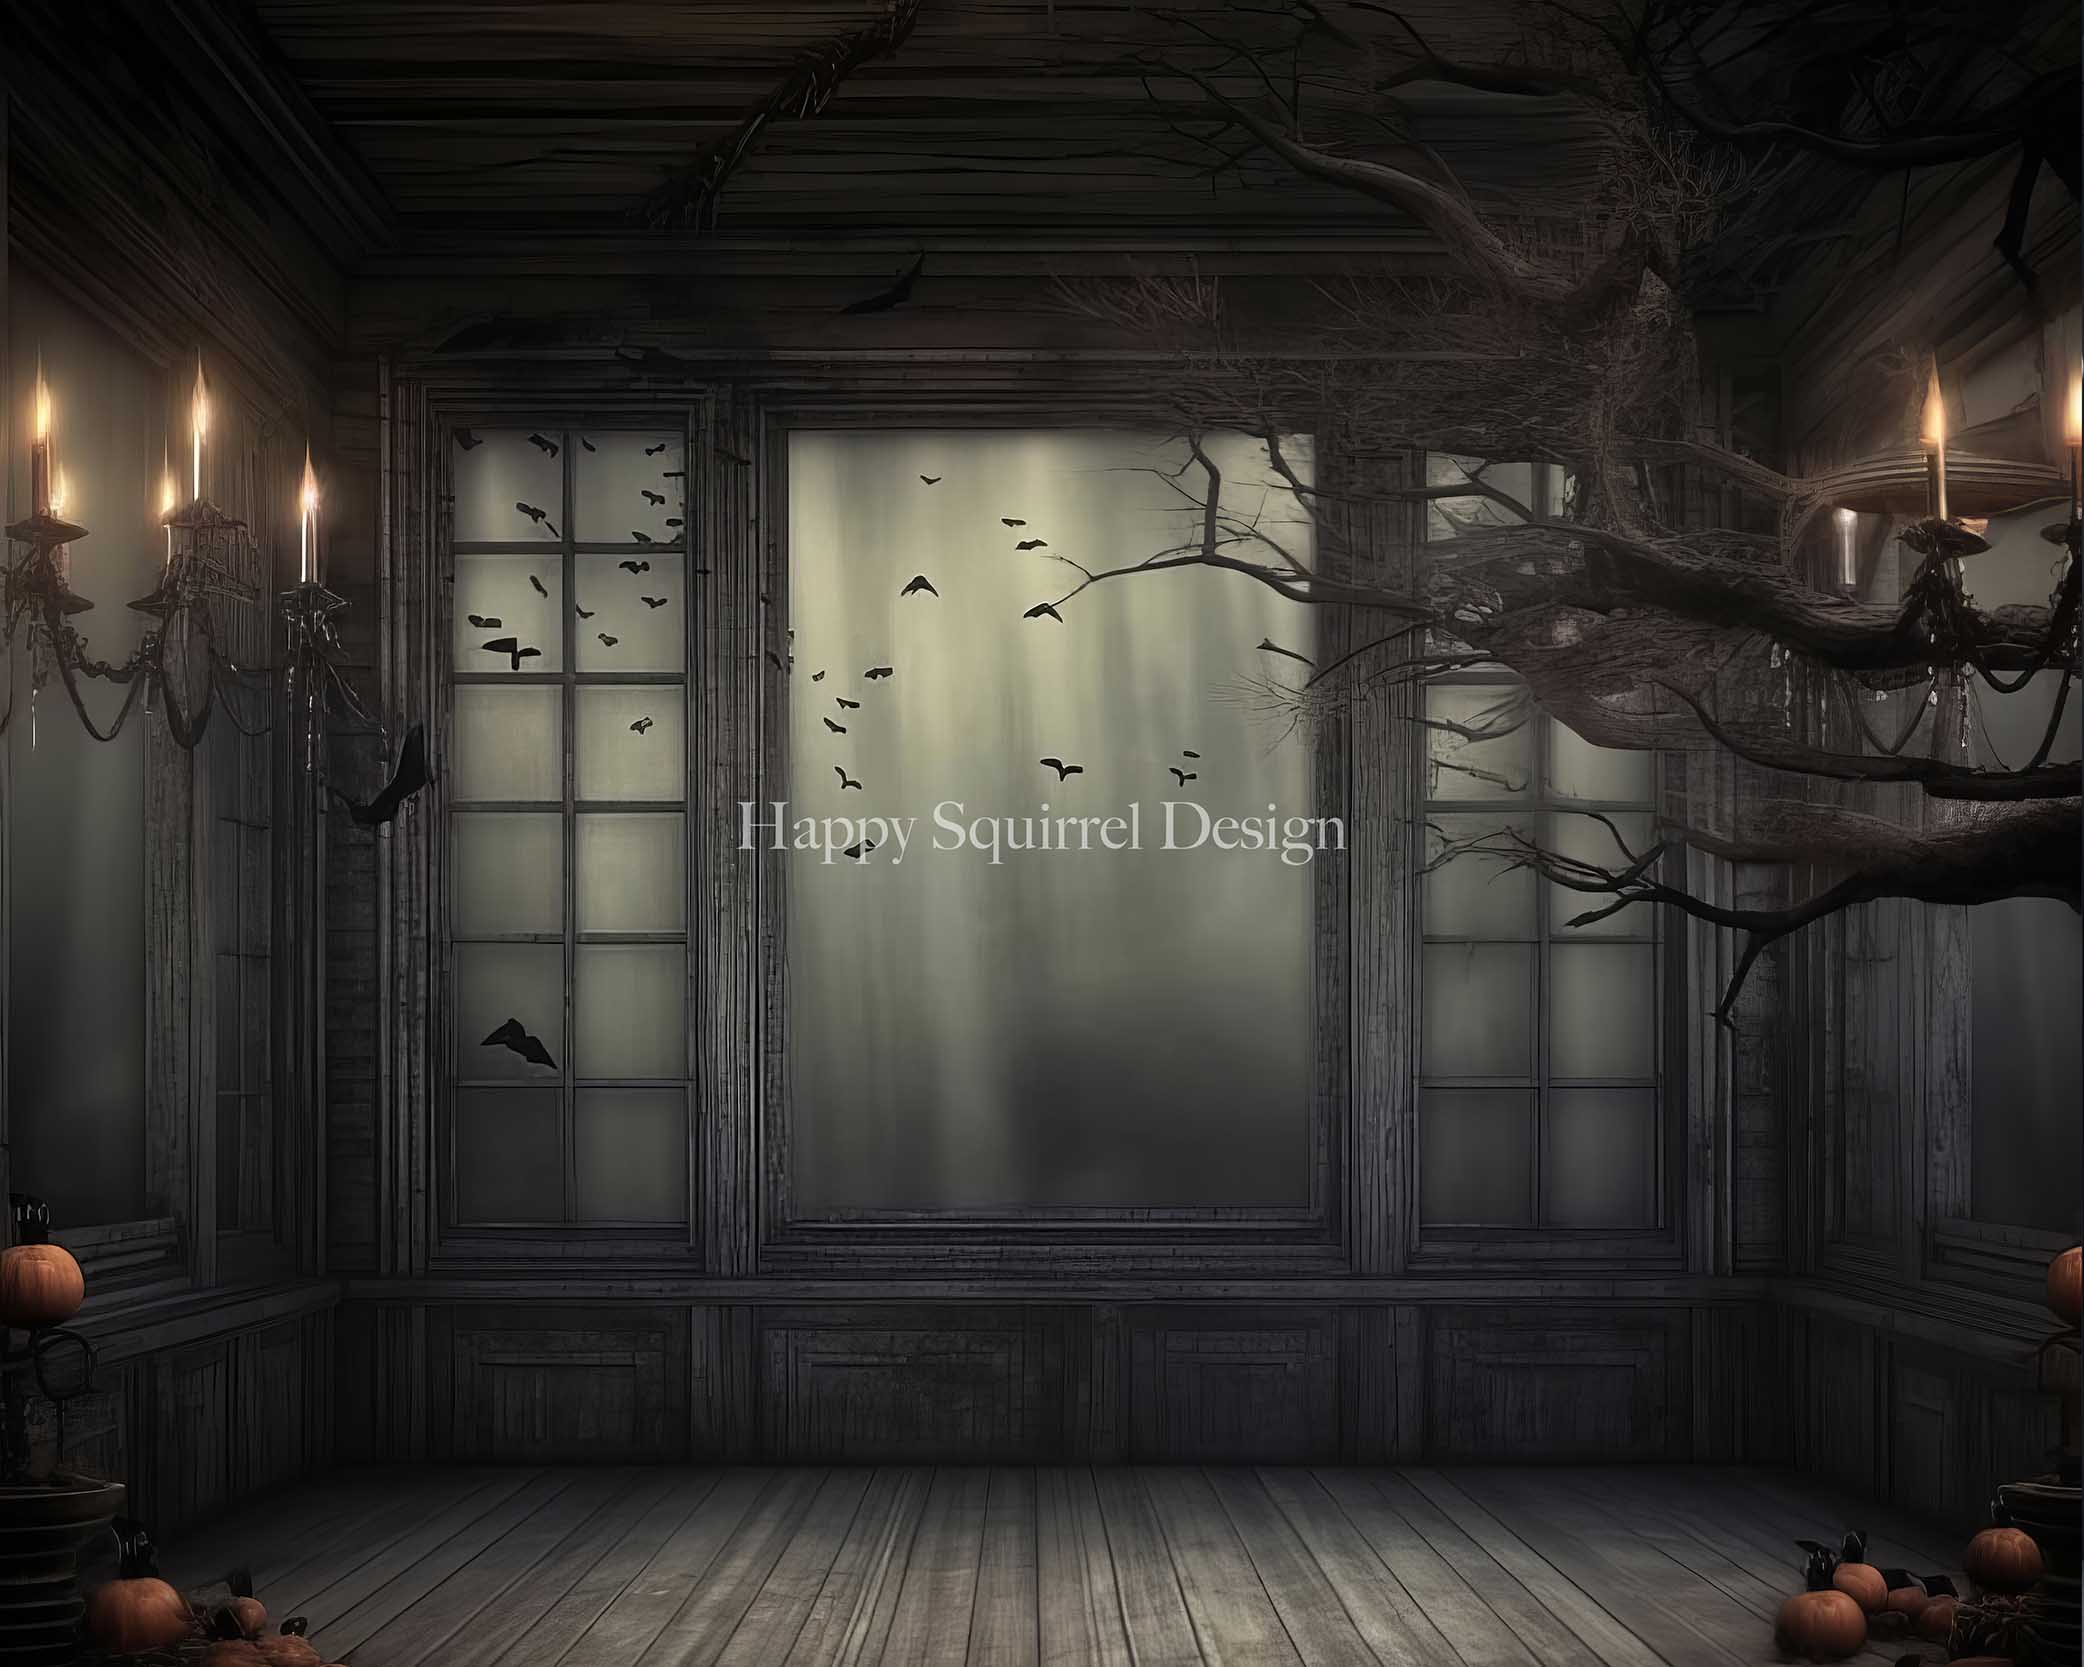 Kate Abandoned Halloween Spooky Room Backdrop Designed by Happy Squirrel Design